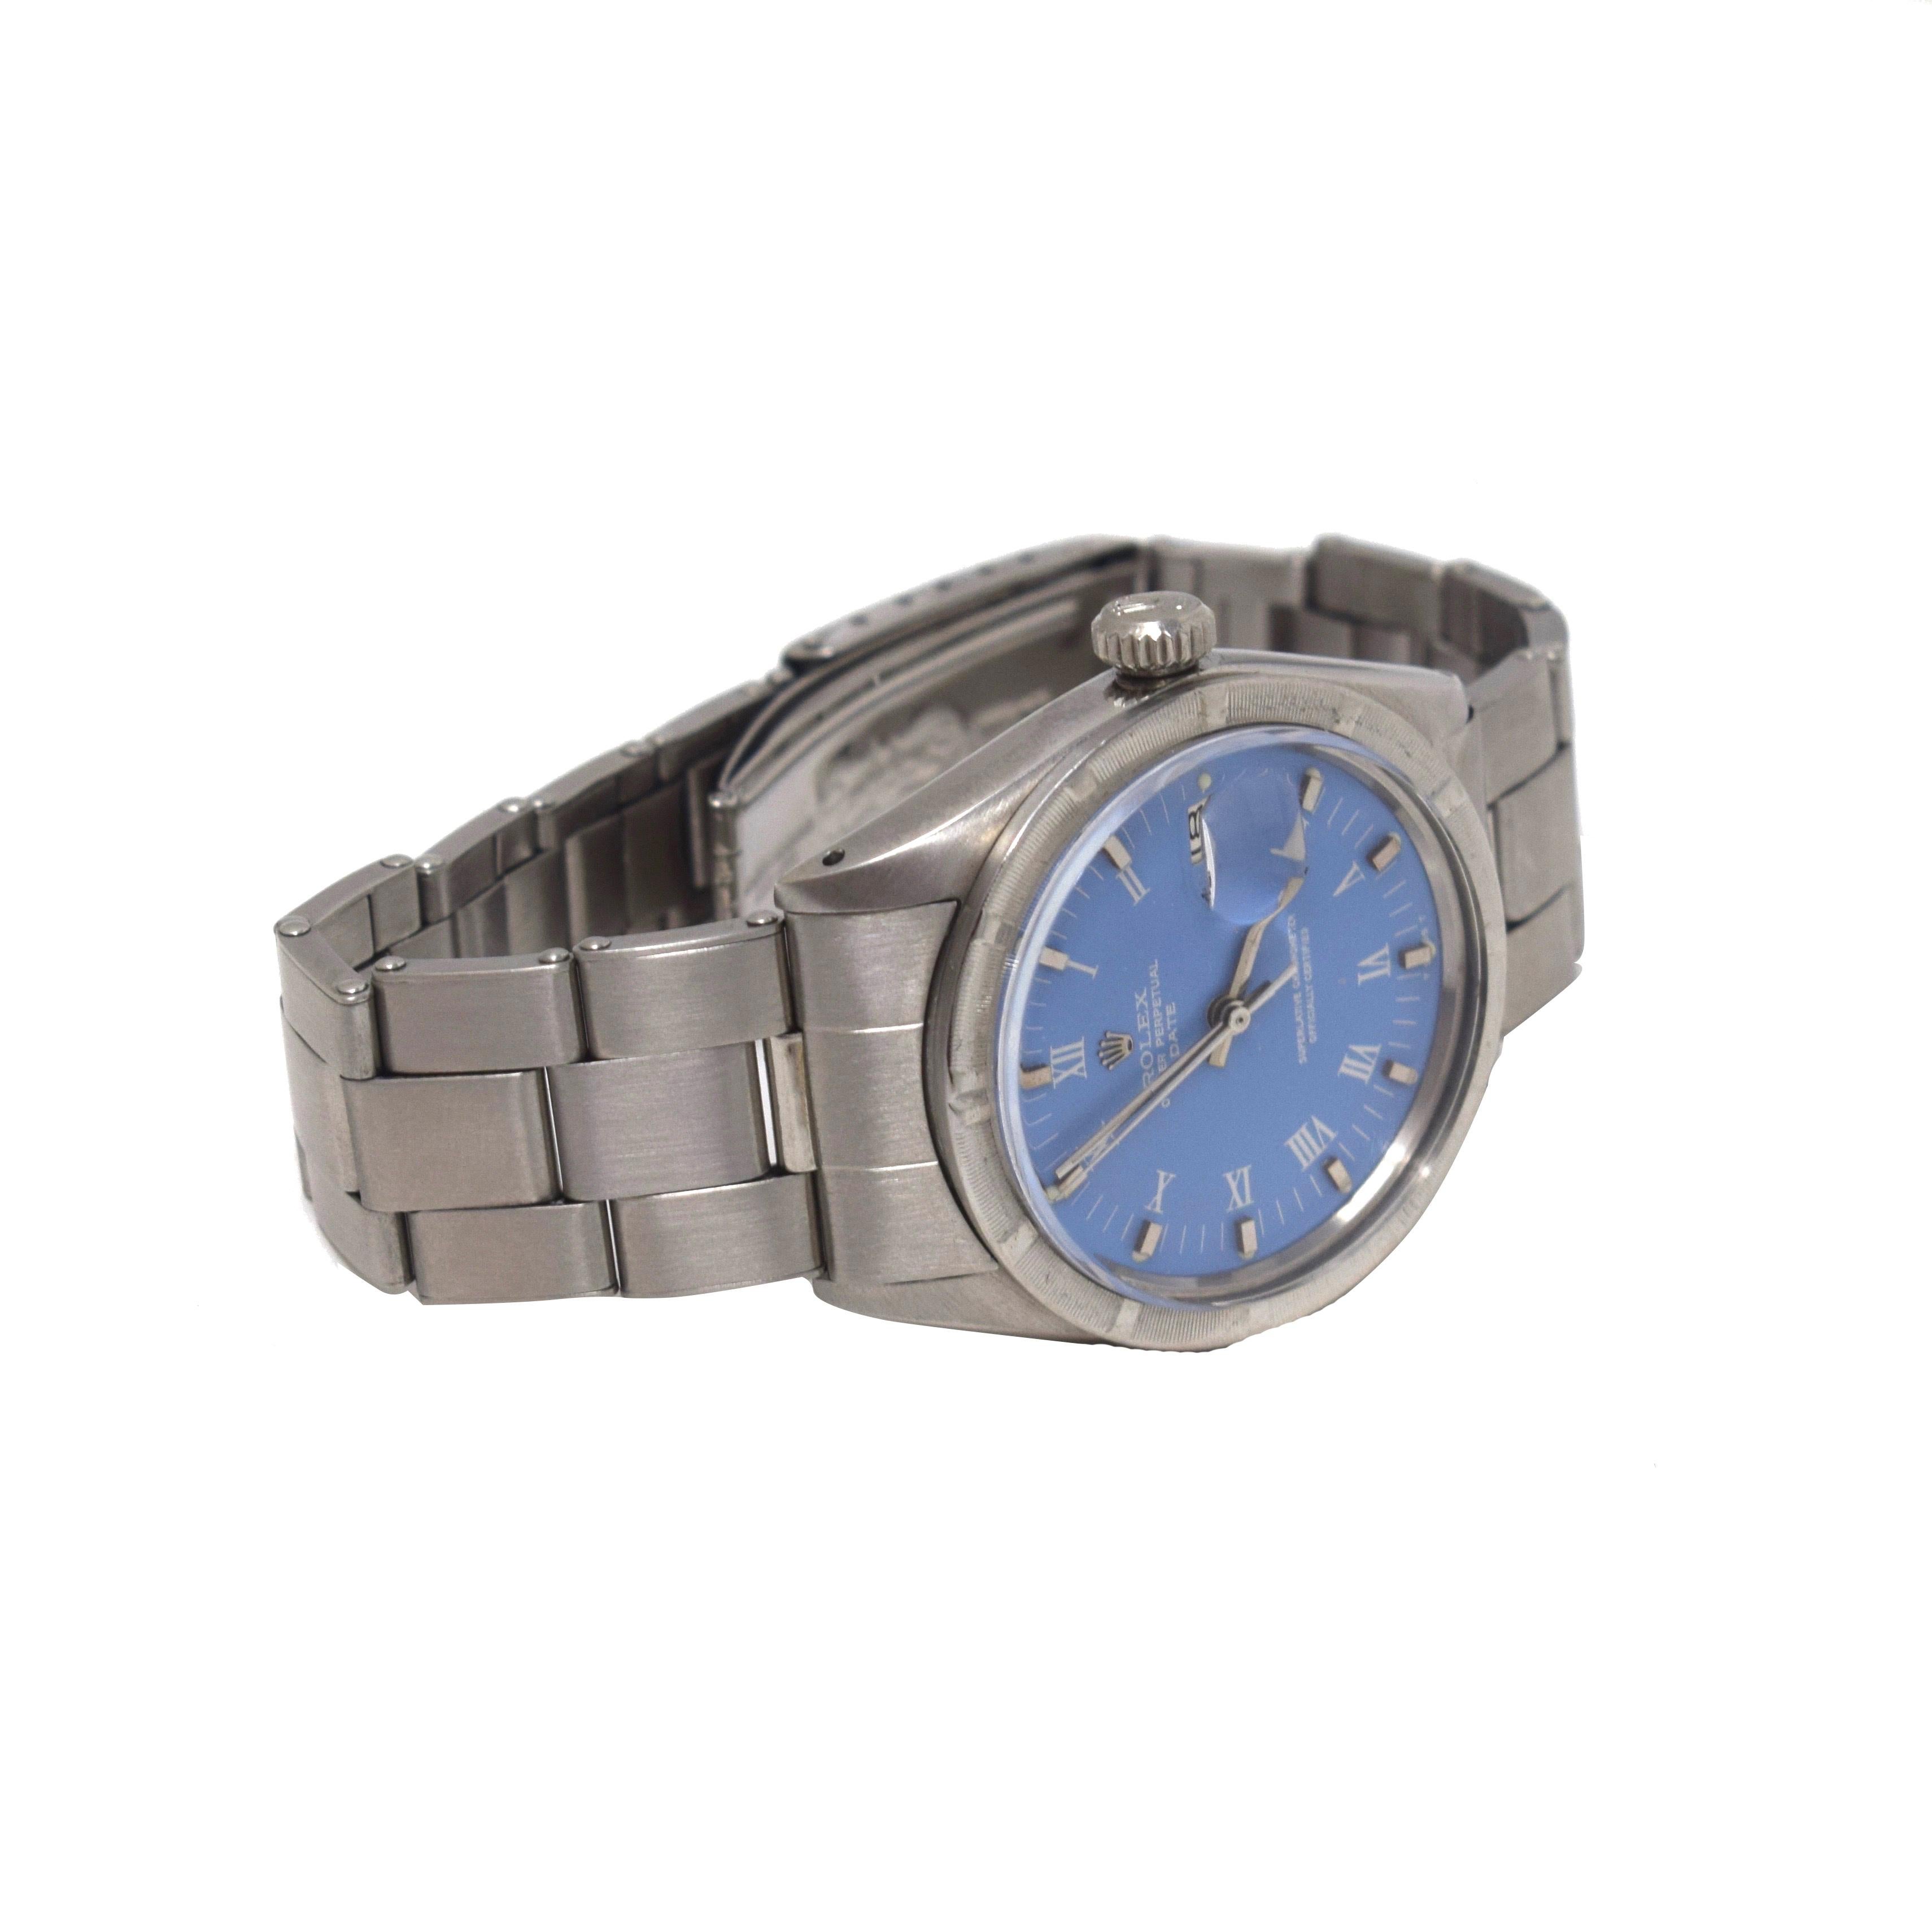 Brilliance Jewels, Miami
Questions? Call Us Anytime!
786,482,8100

Brand: Rolex

Model Number: 1501

Model Name:  Date

Serial Number:  9,8**** (either 1953 or 1963)

Movement: Automatic

Case Size:  35 mm

Dial Color: Blue

Dial: Roman Numerals